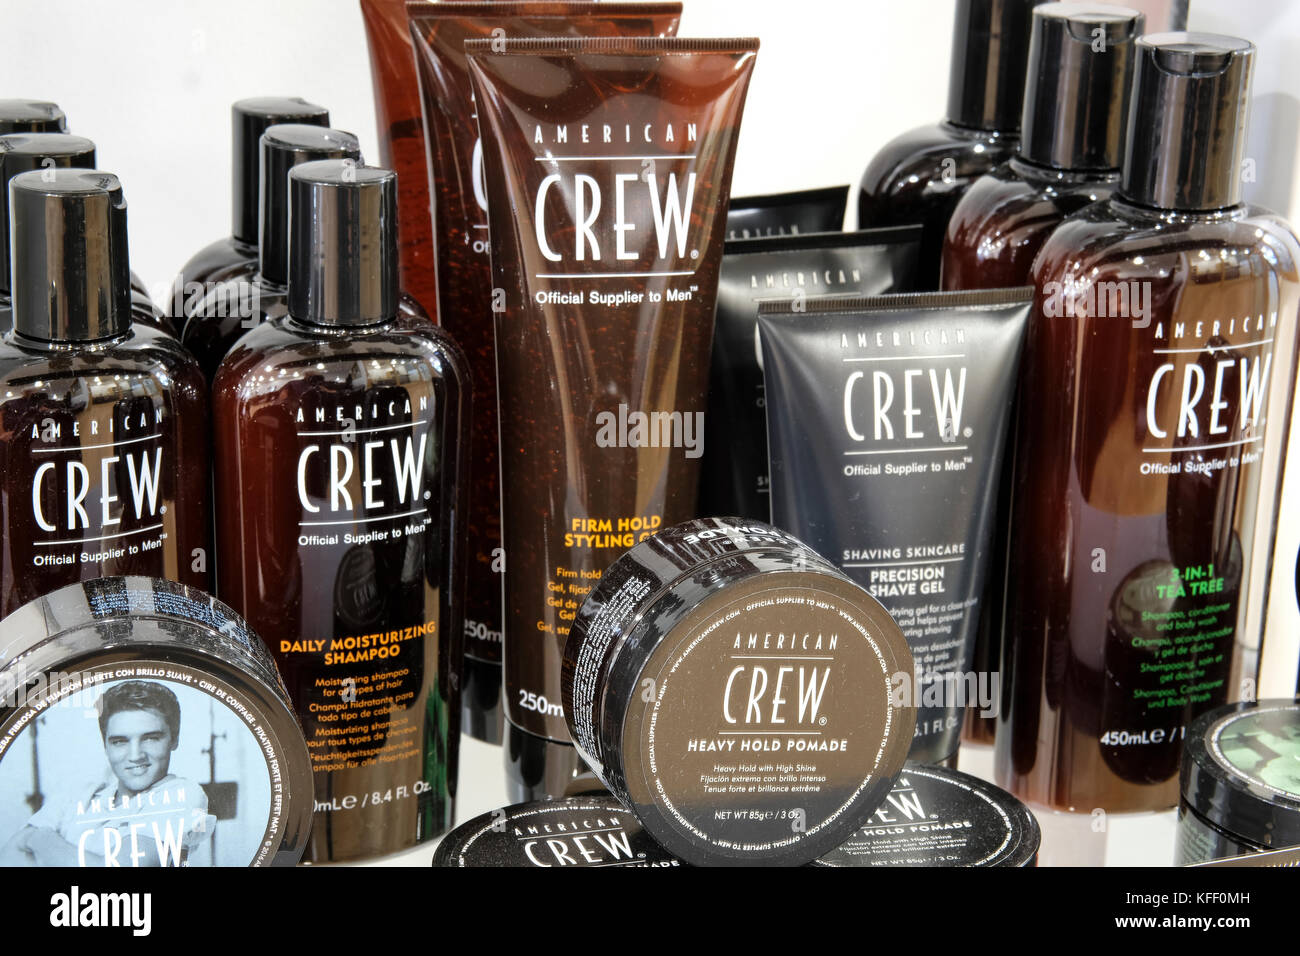 American Crew grooming products for men Stock Photo